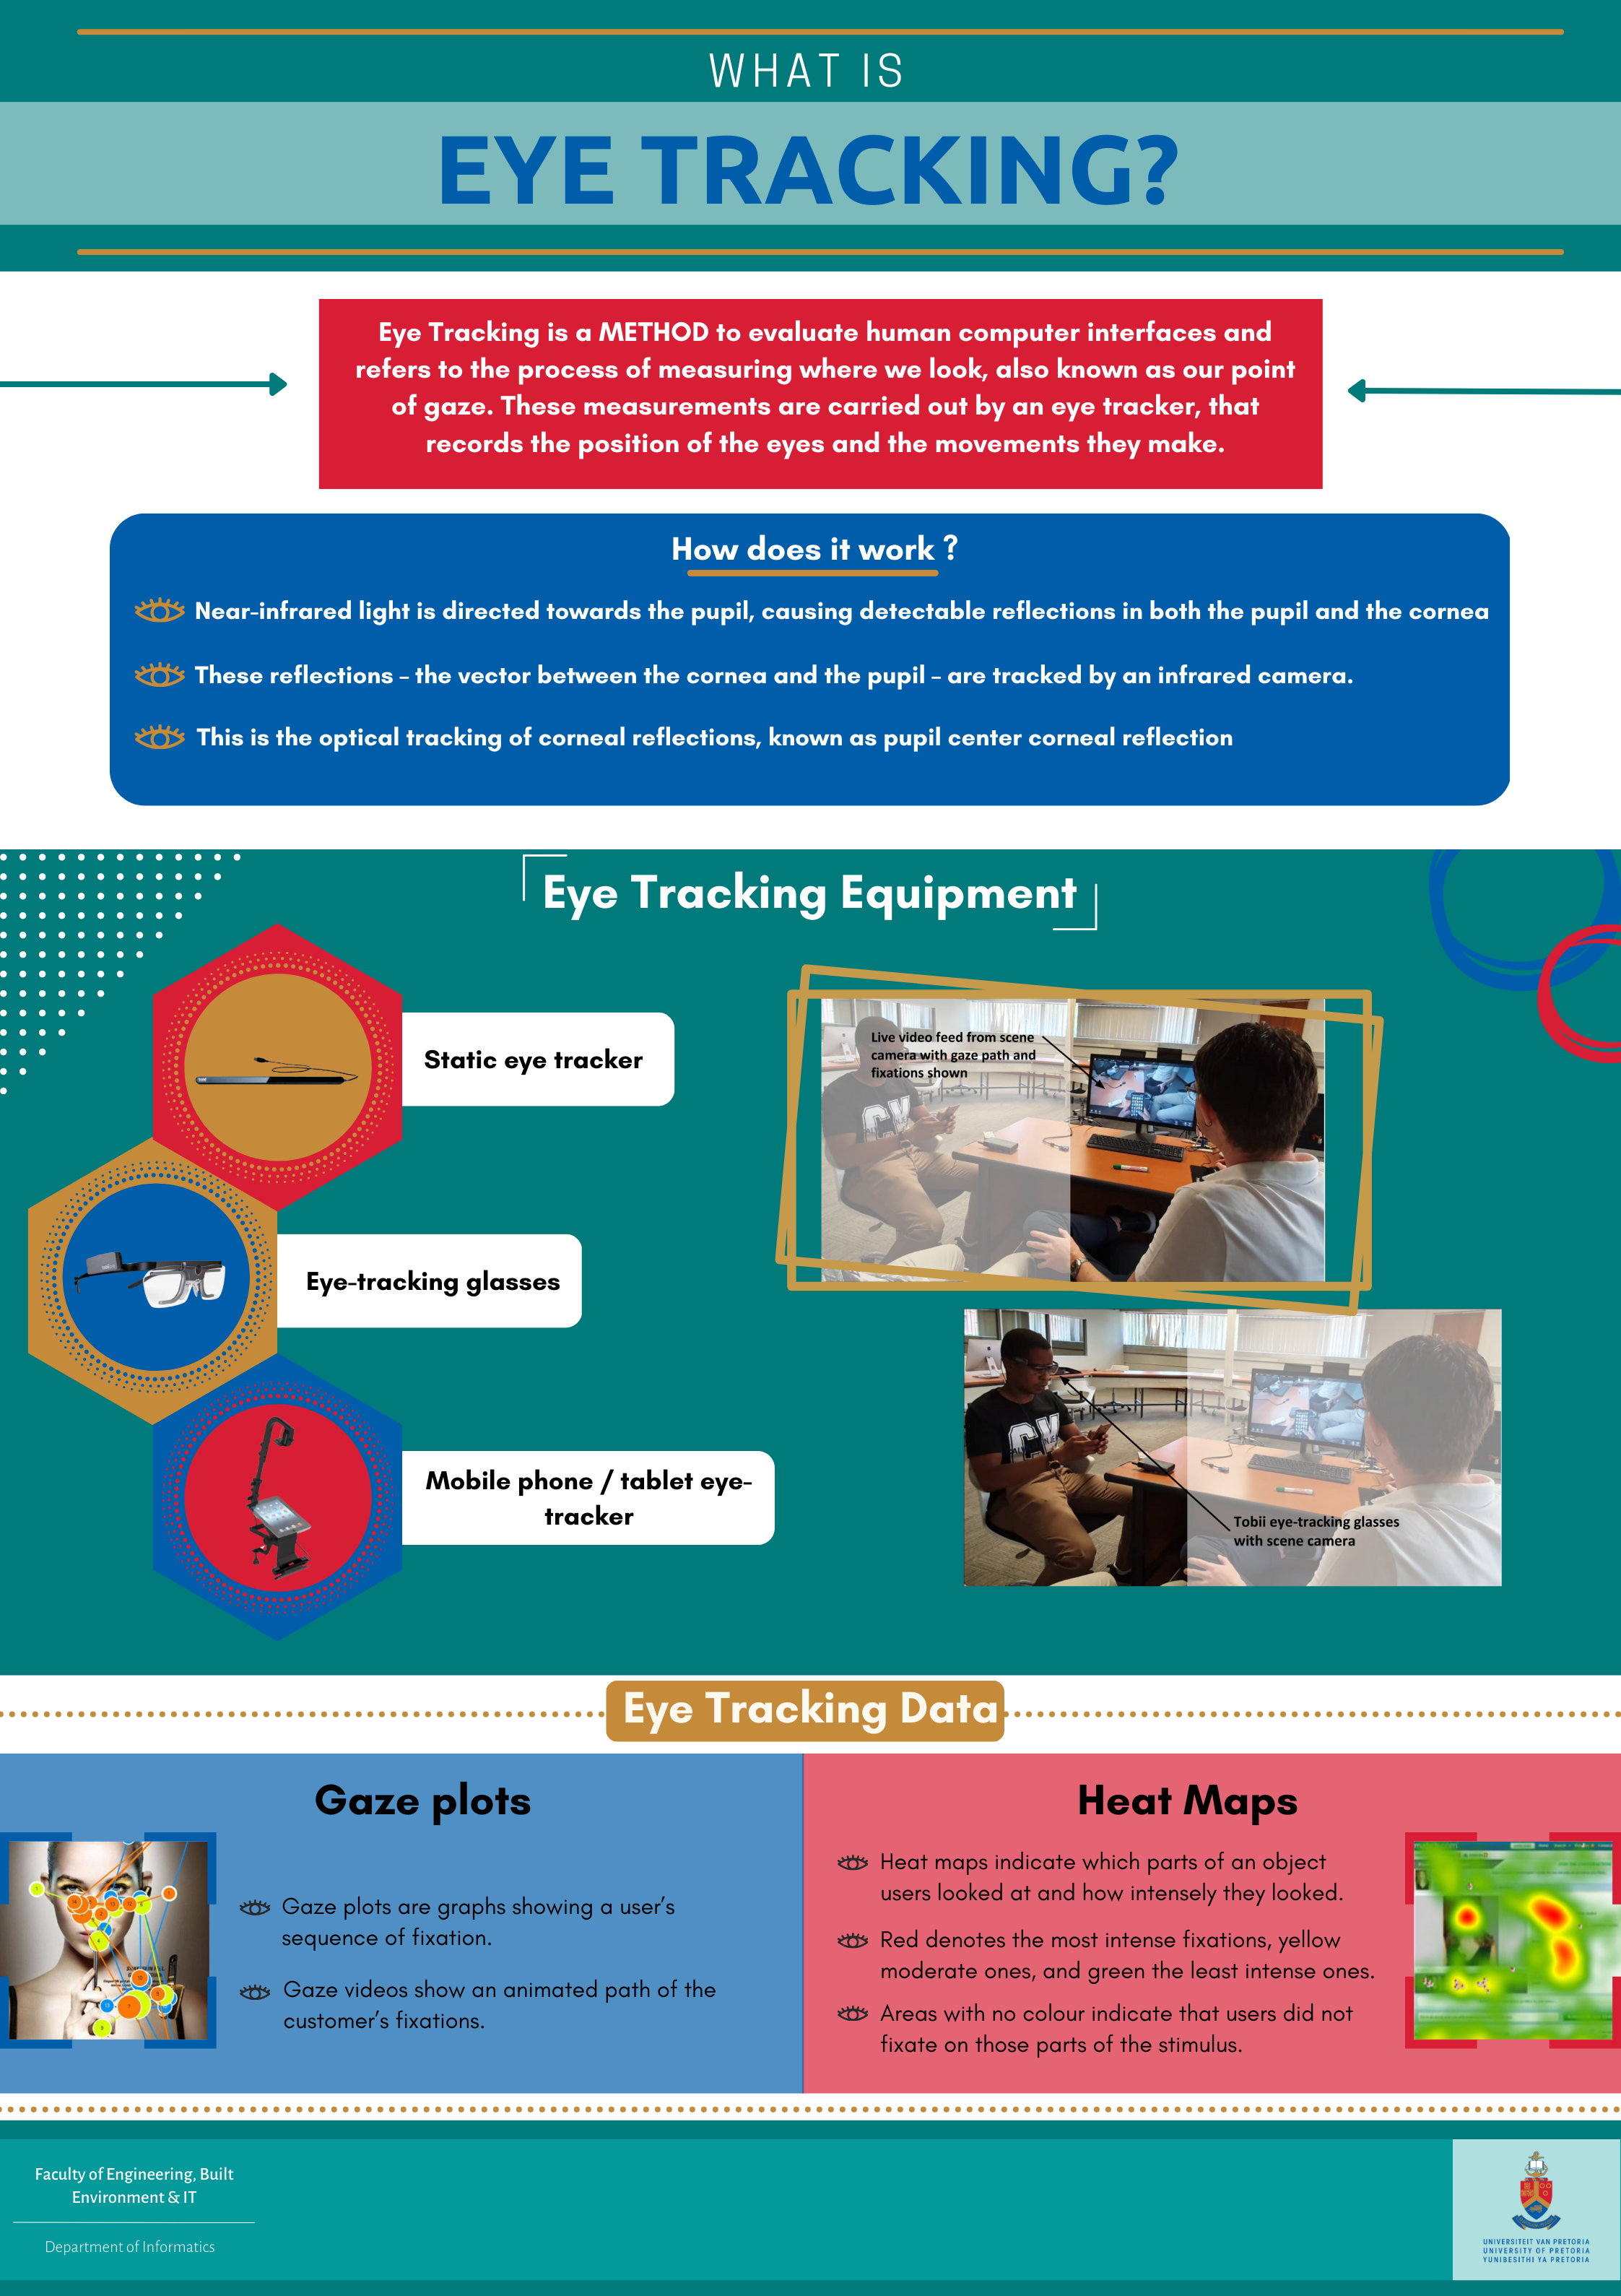 What is eye tracking?